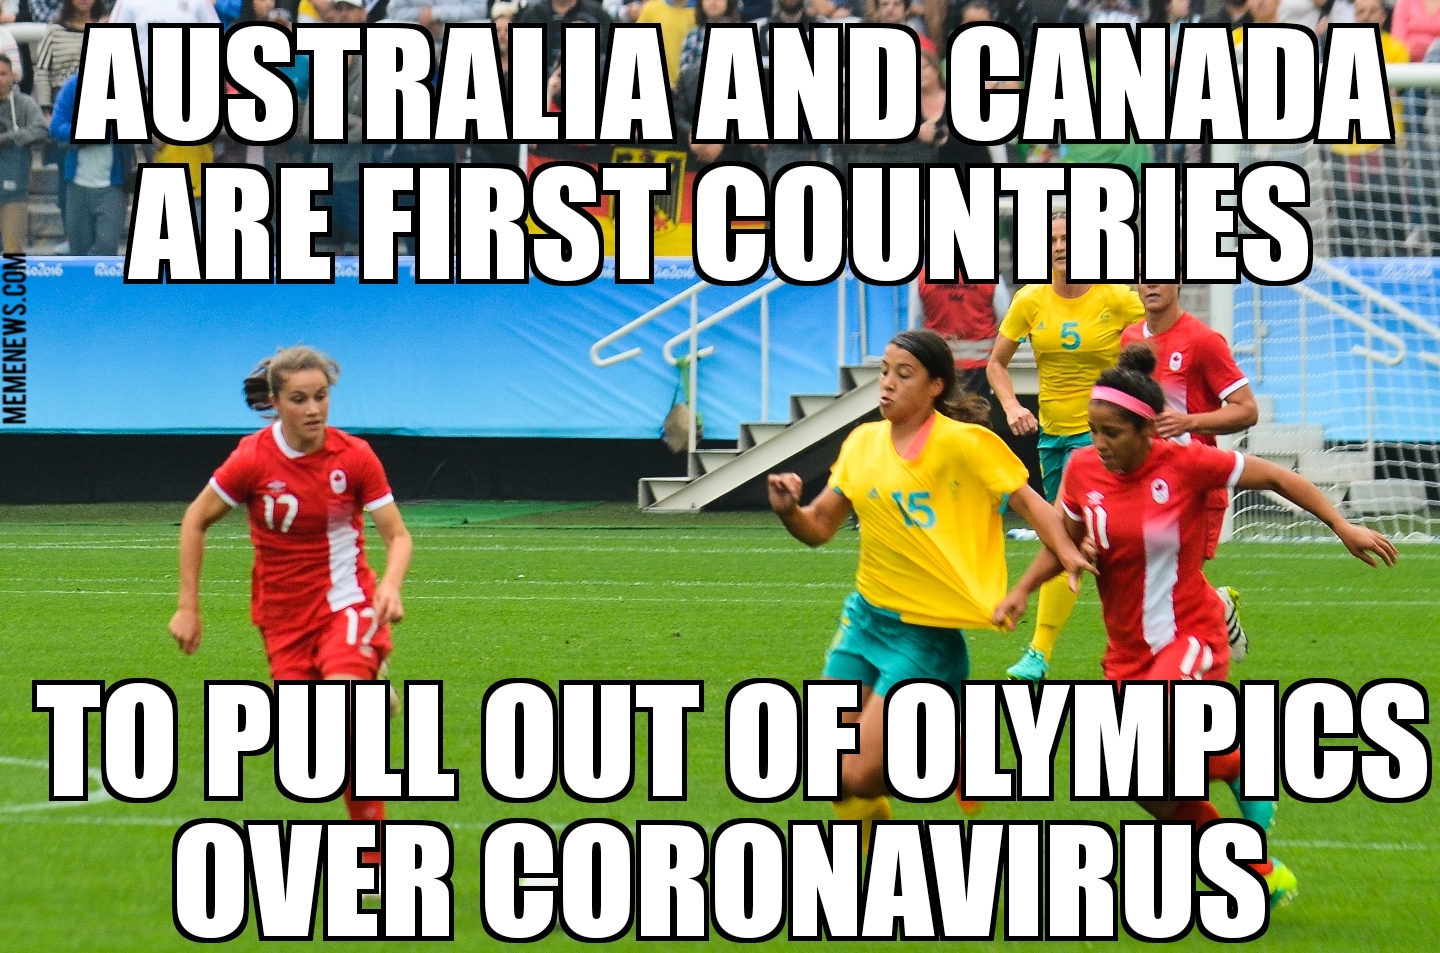 Australia and Canada pull out of Olympics over coronavirus